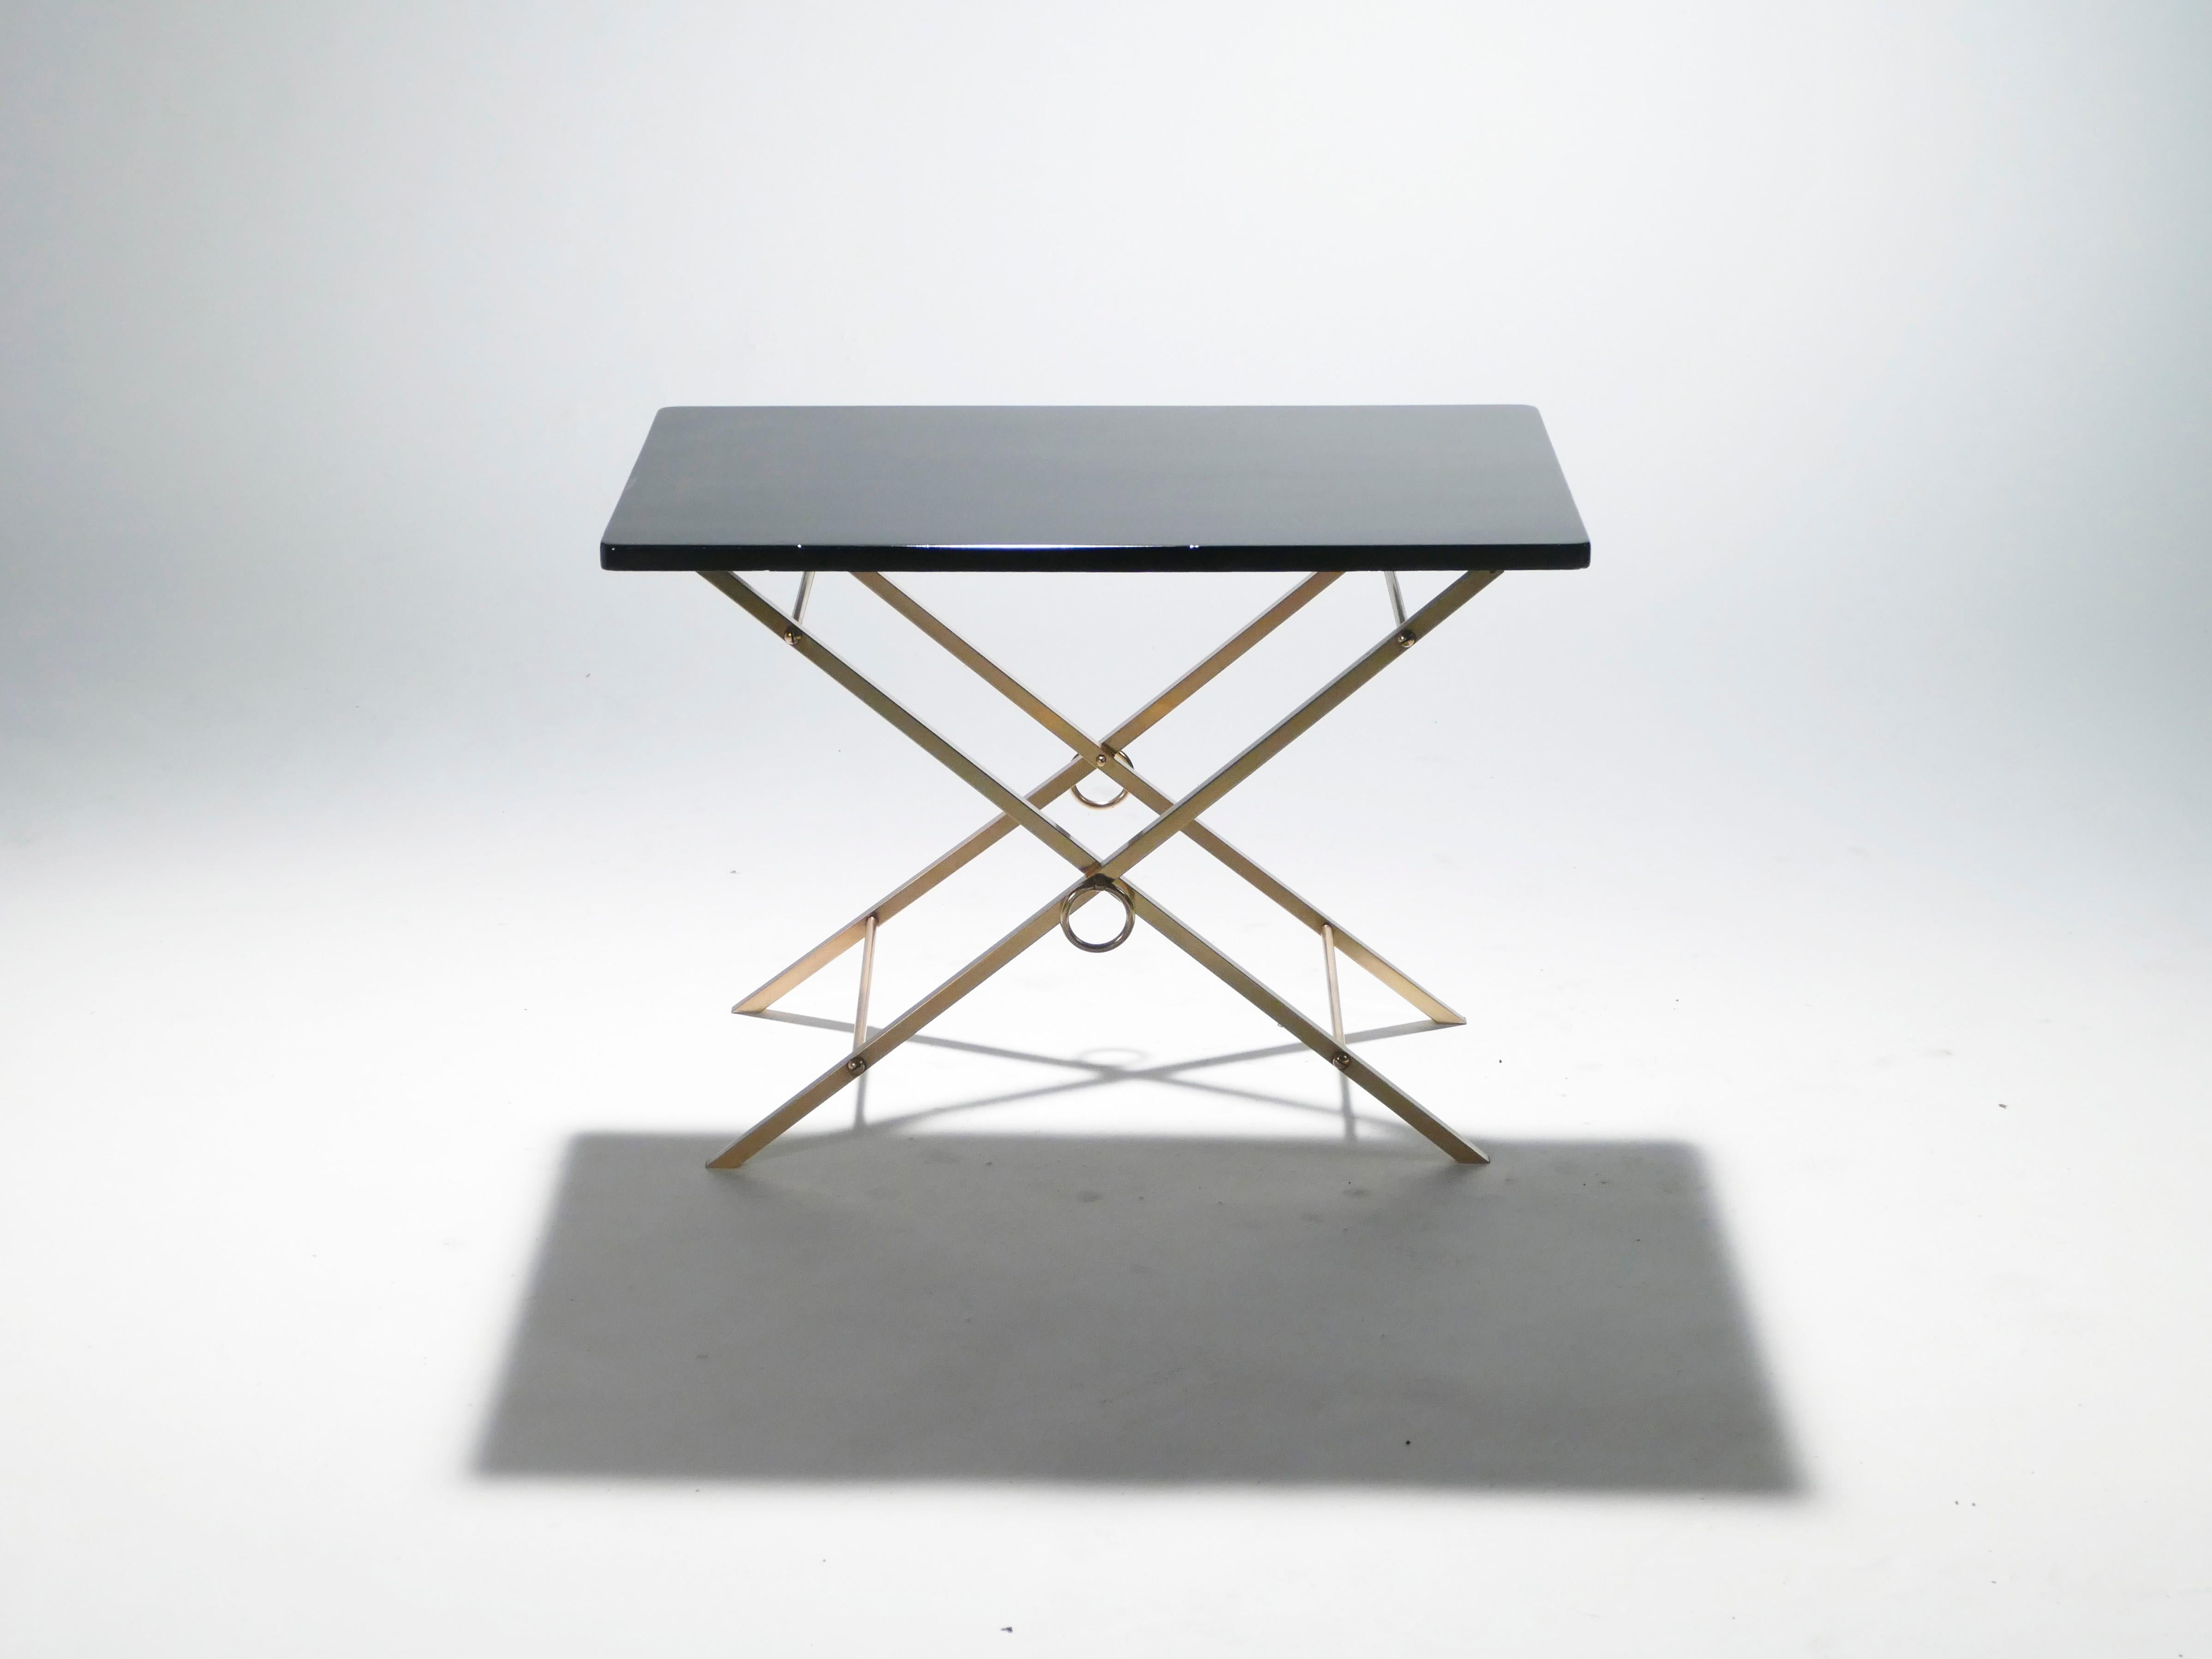 This chic 1960s table emanates sophisticated glamour with its glossy black lacquer top and pristine brass legs. As an unadorned take on both Art Deco and modernism, it is reminiscent of much of Jacques Adnet’s work that continues to feel modern